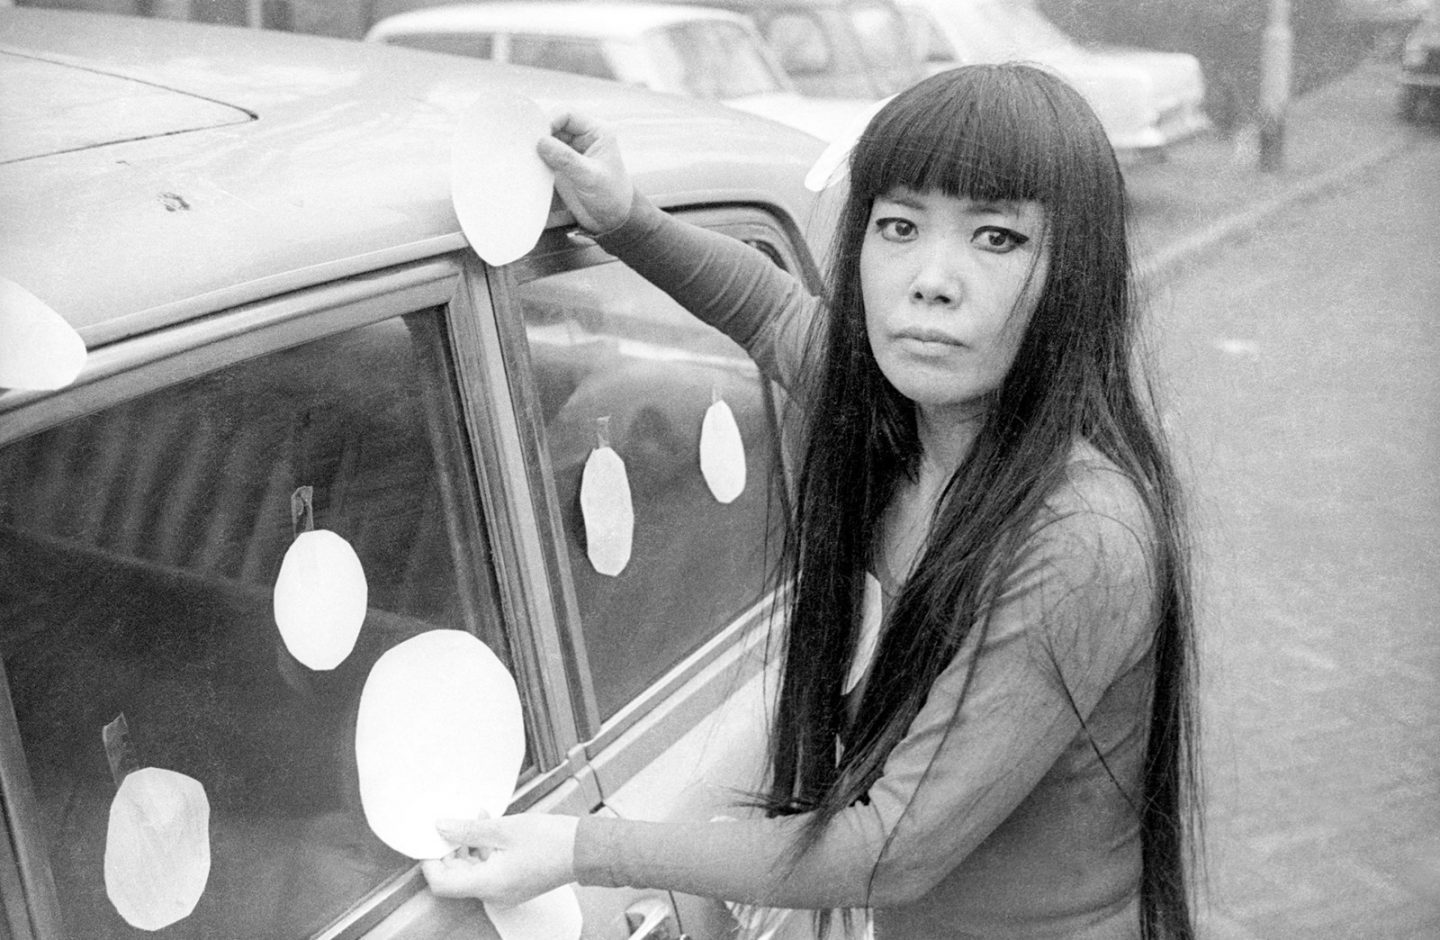 Collecting guide: 10 things to know about Yayoi Kusama